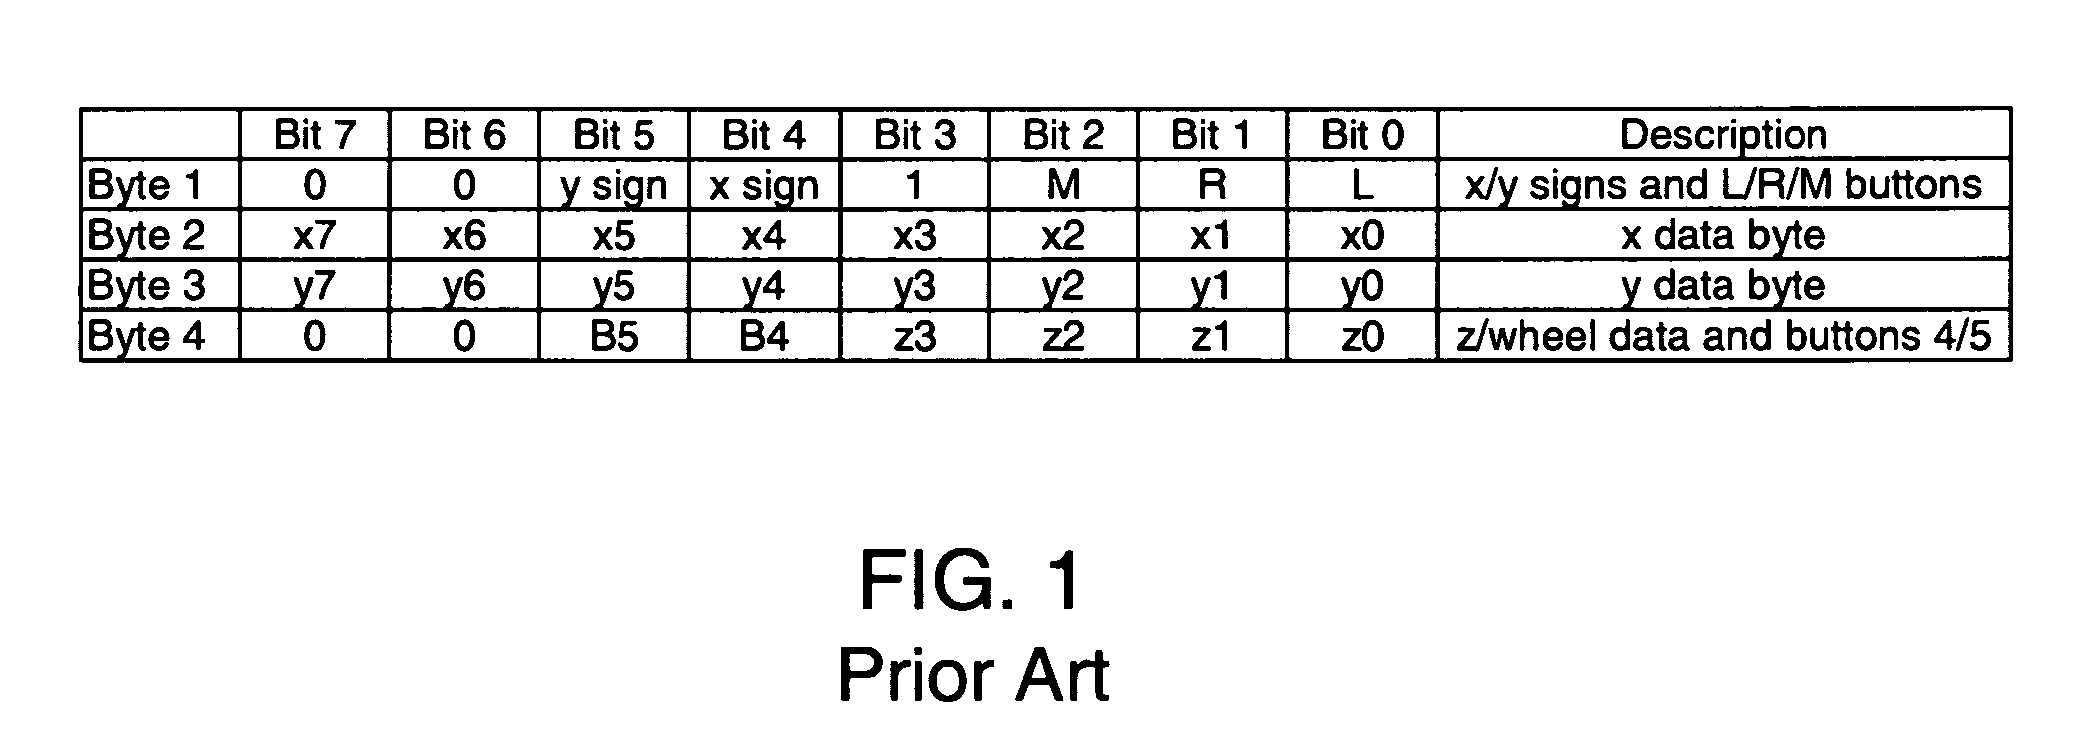 Enhanced input using packet switching over a PS/2 or other interface